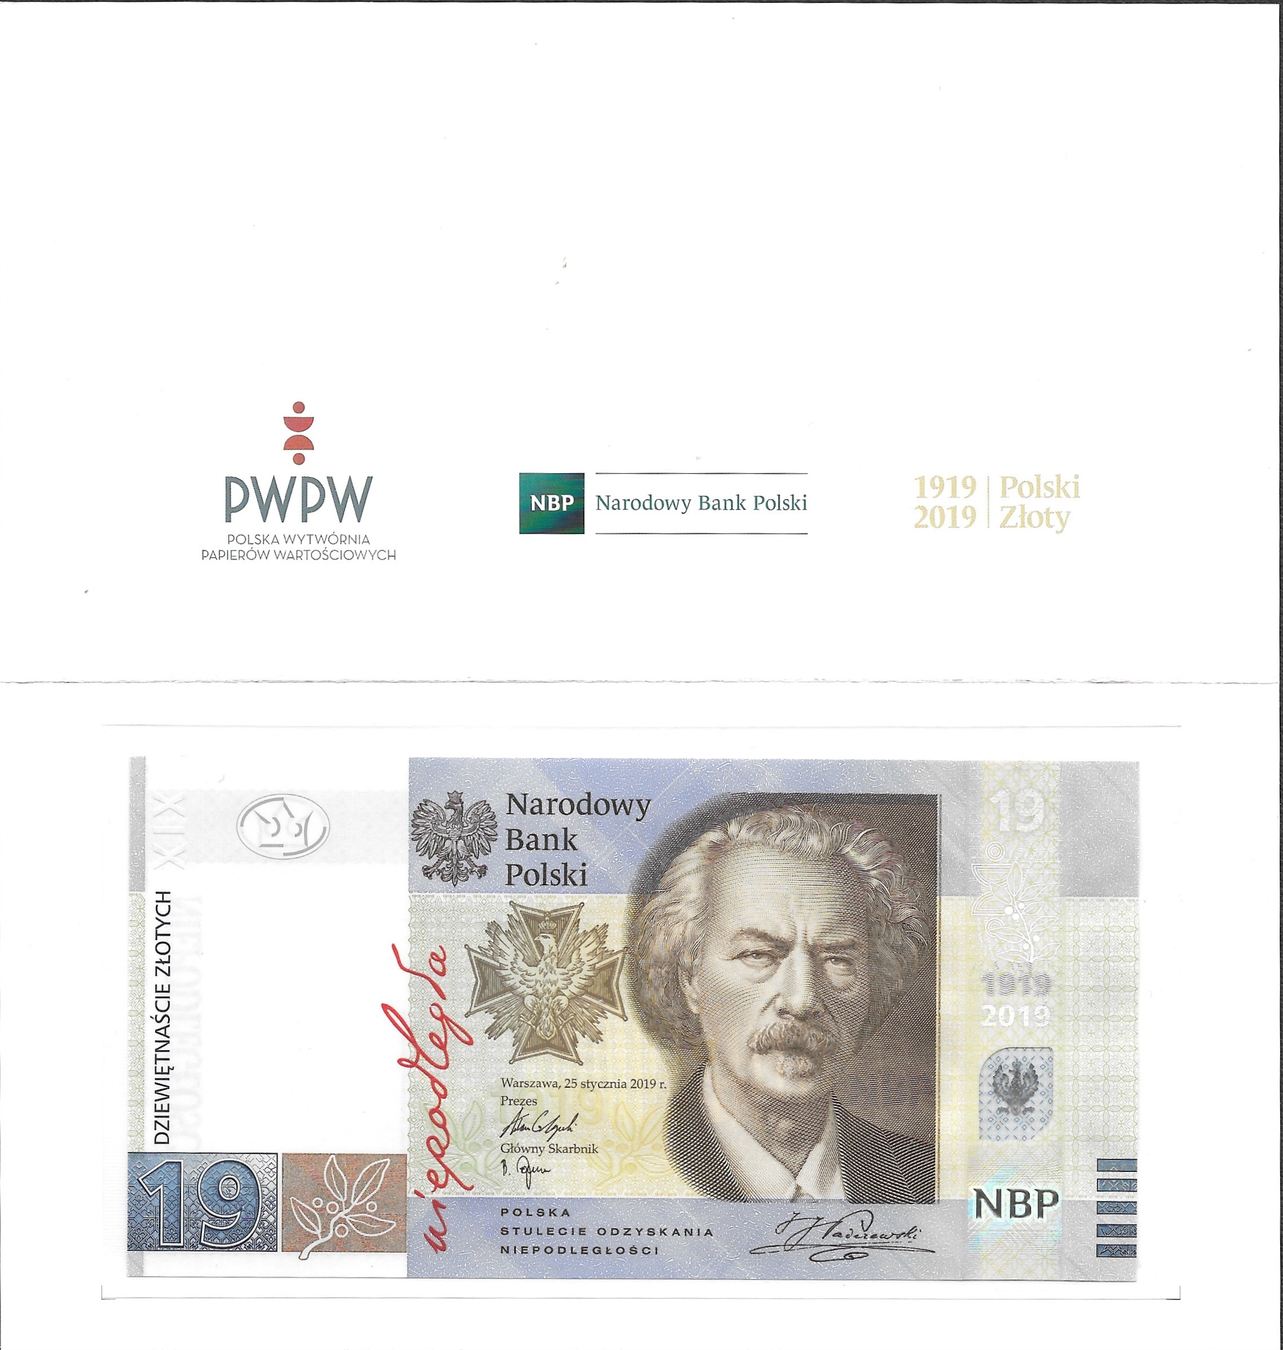 19 zlotych 100 TH ANNIVERSARY OF THE POLISH SECURITY PRINTING WORKS P-NEW 